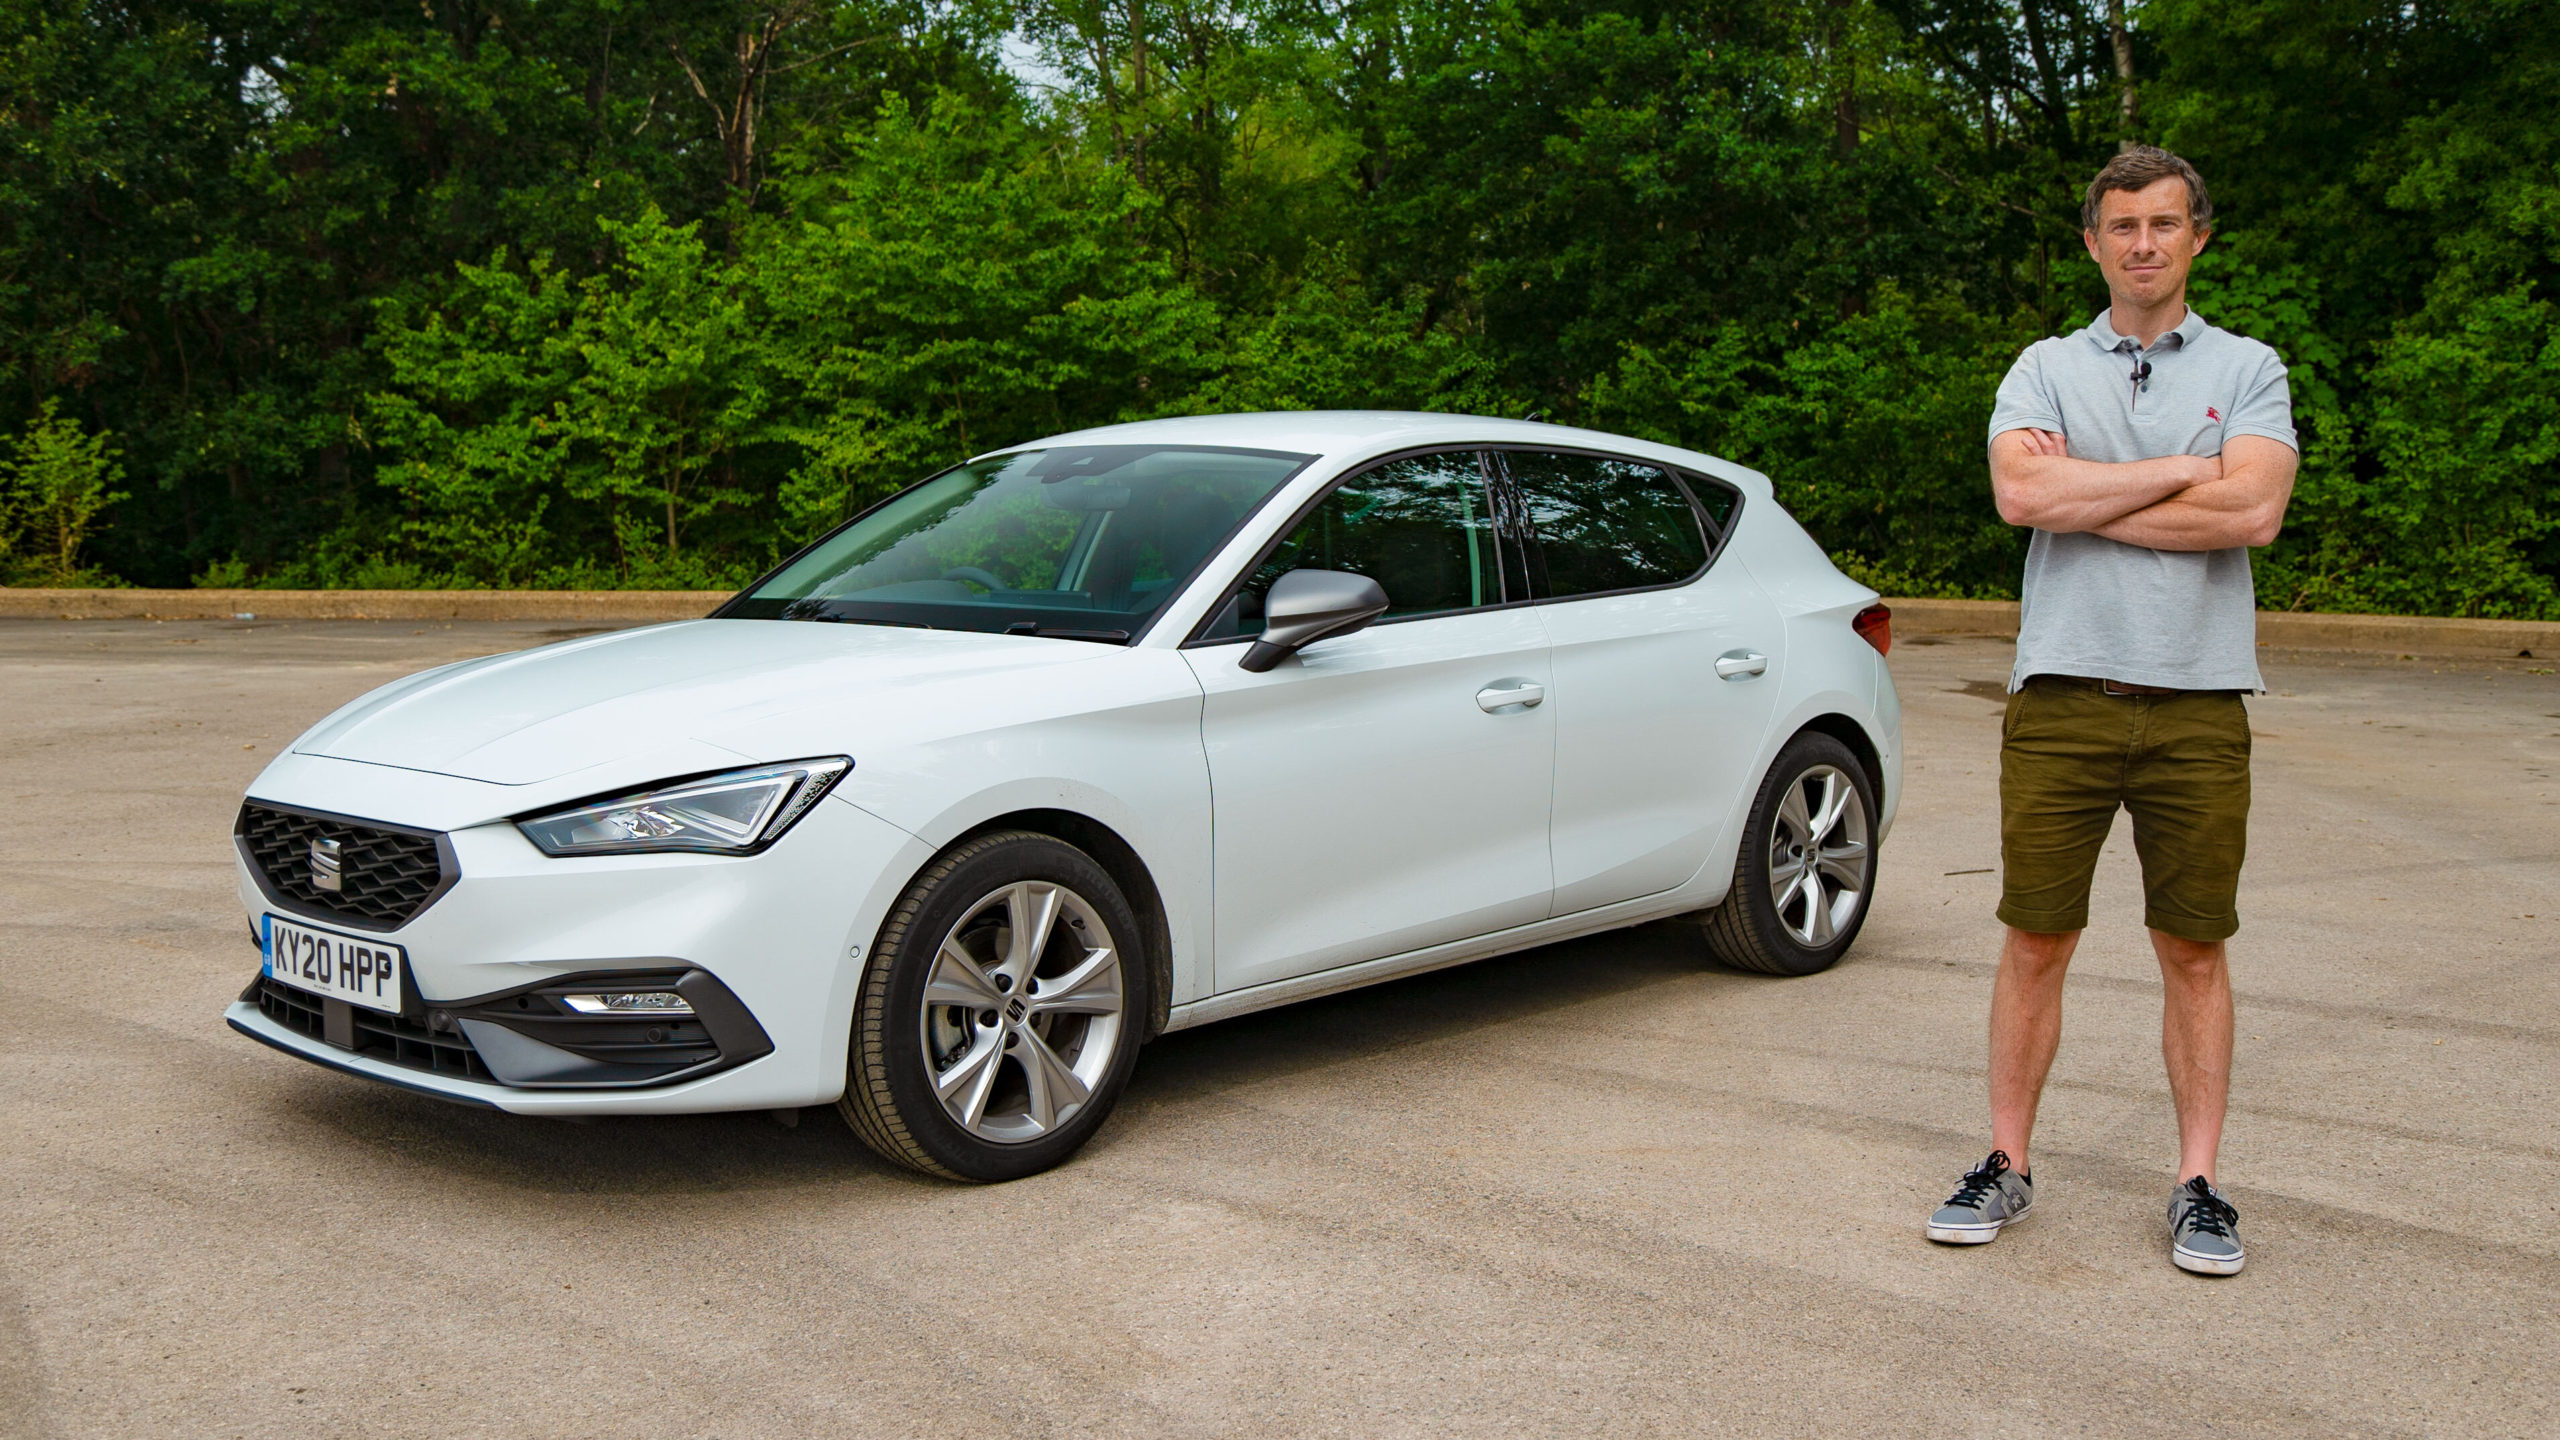 SEAT Leon Review (2020) 